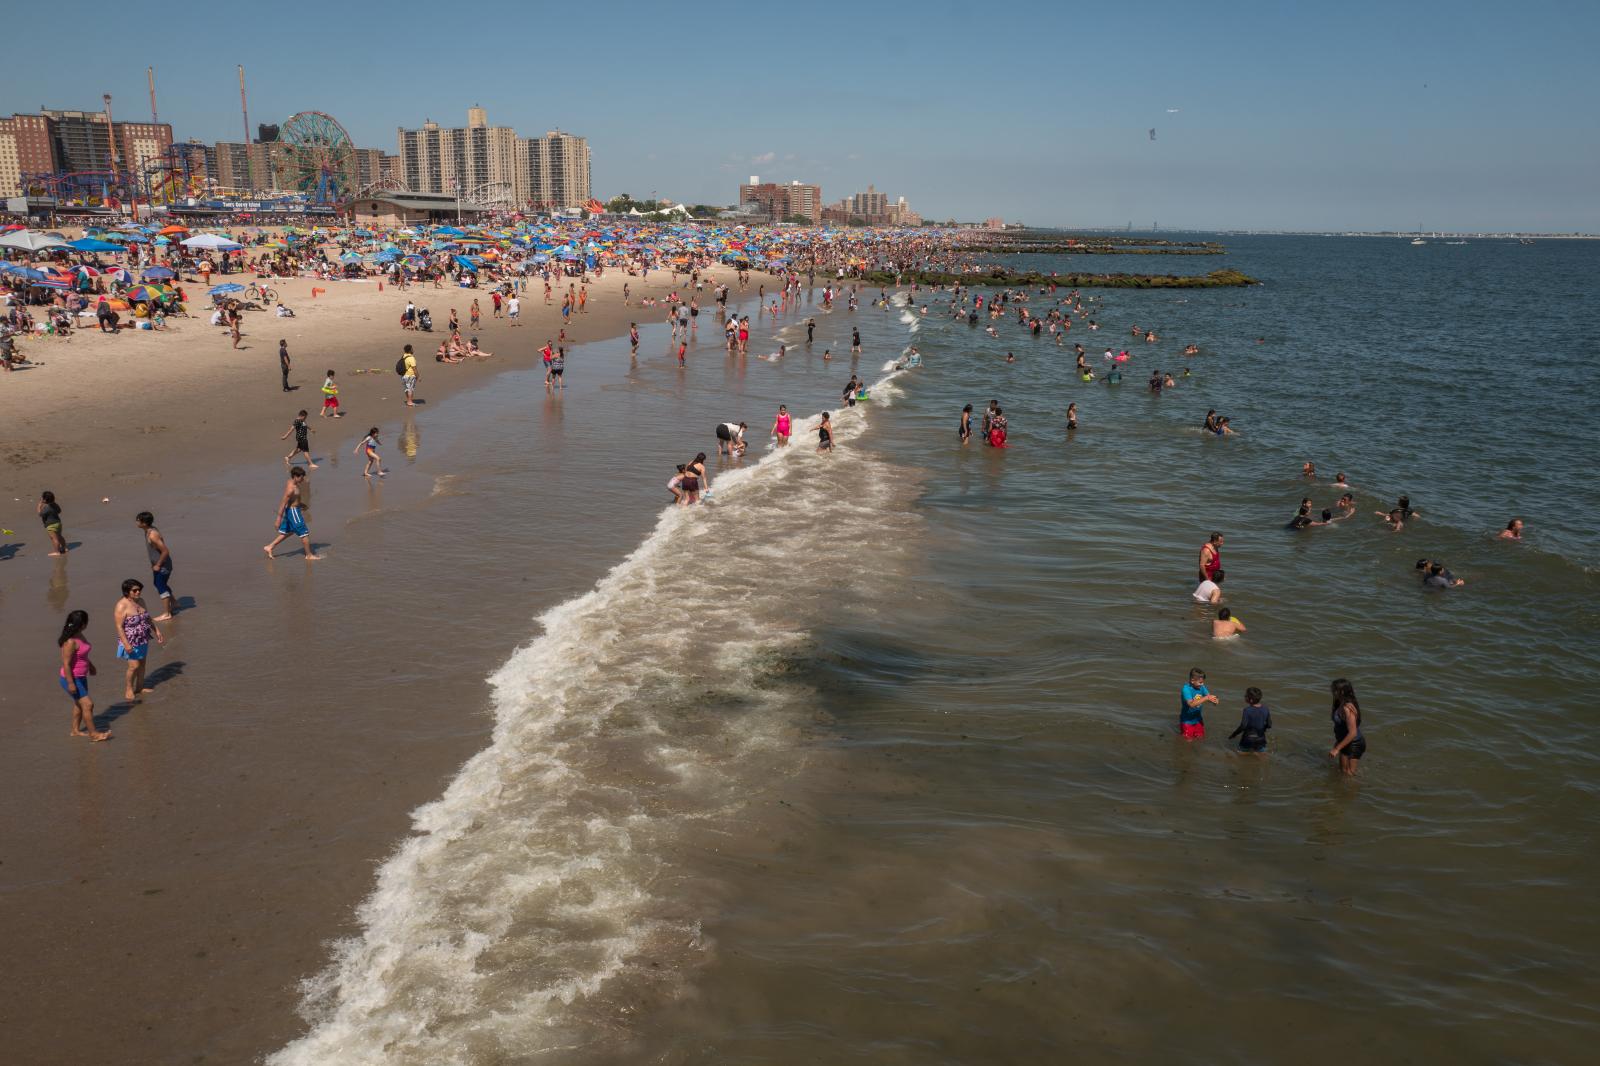 Ocean at Coney Island, July, 2022 | Buy this image